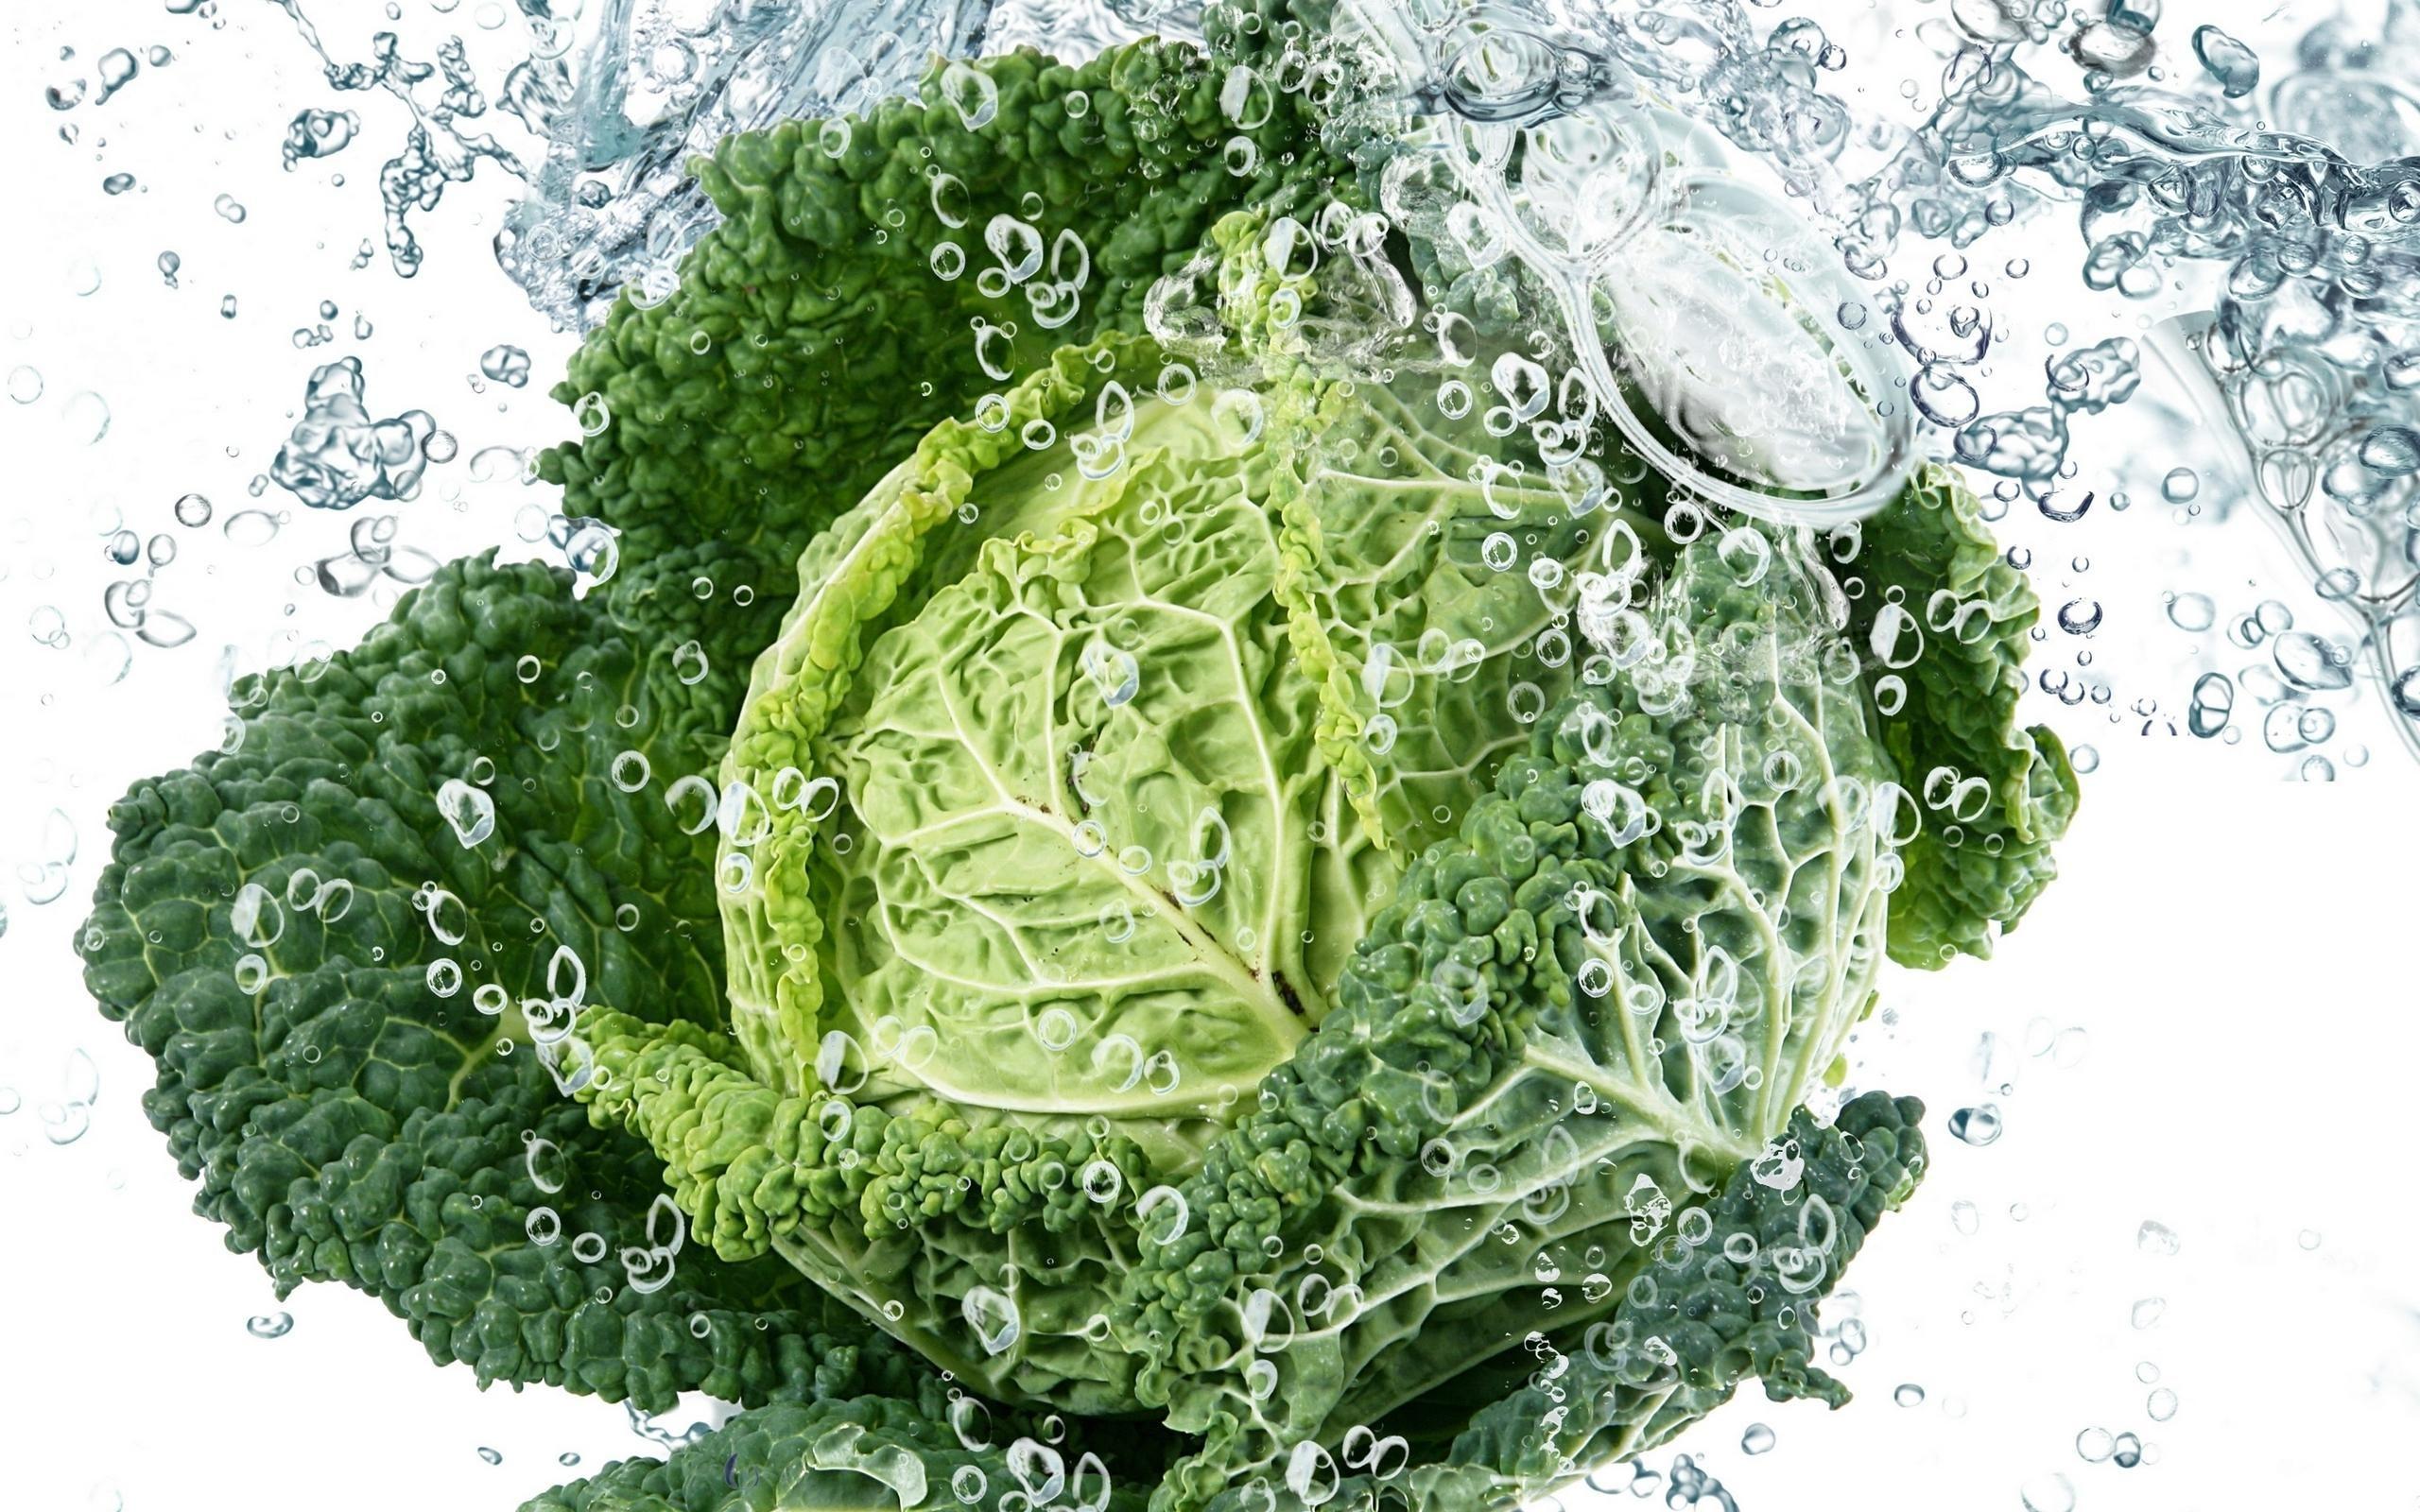 Vegetable_cabbage_green_leaves_water_spray_hd Wallpaper 83944